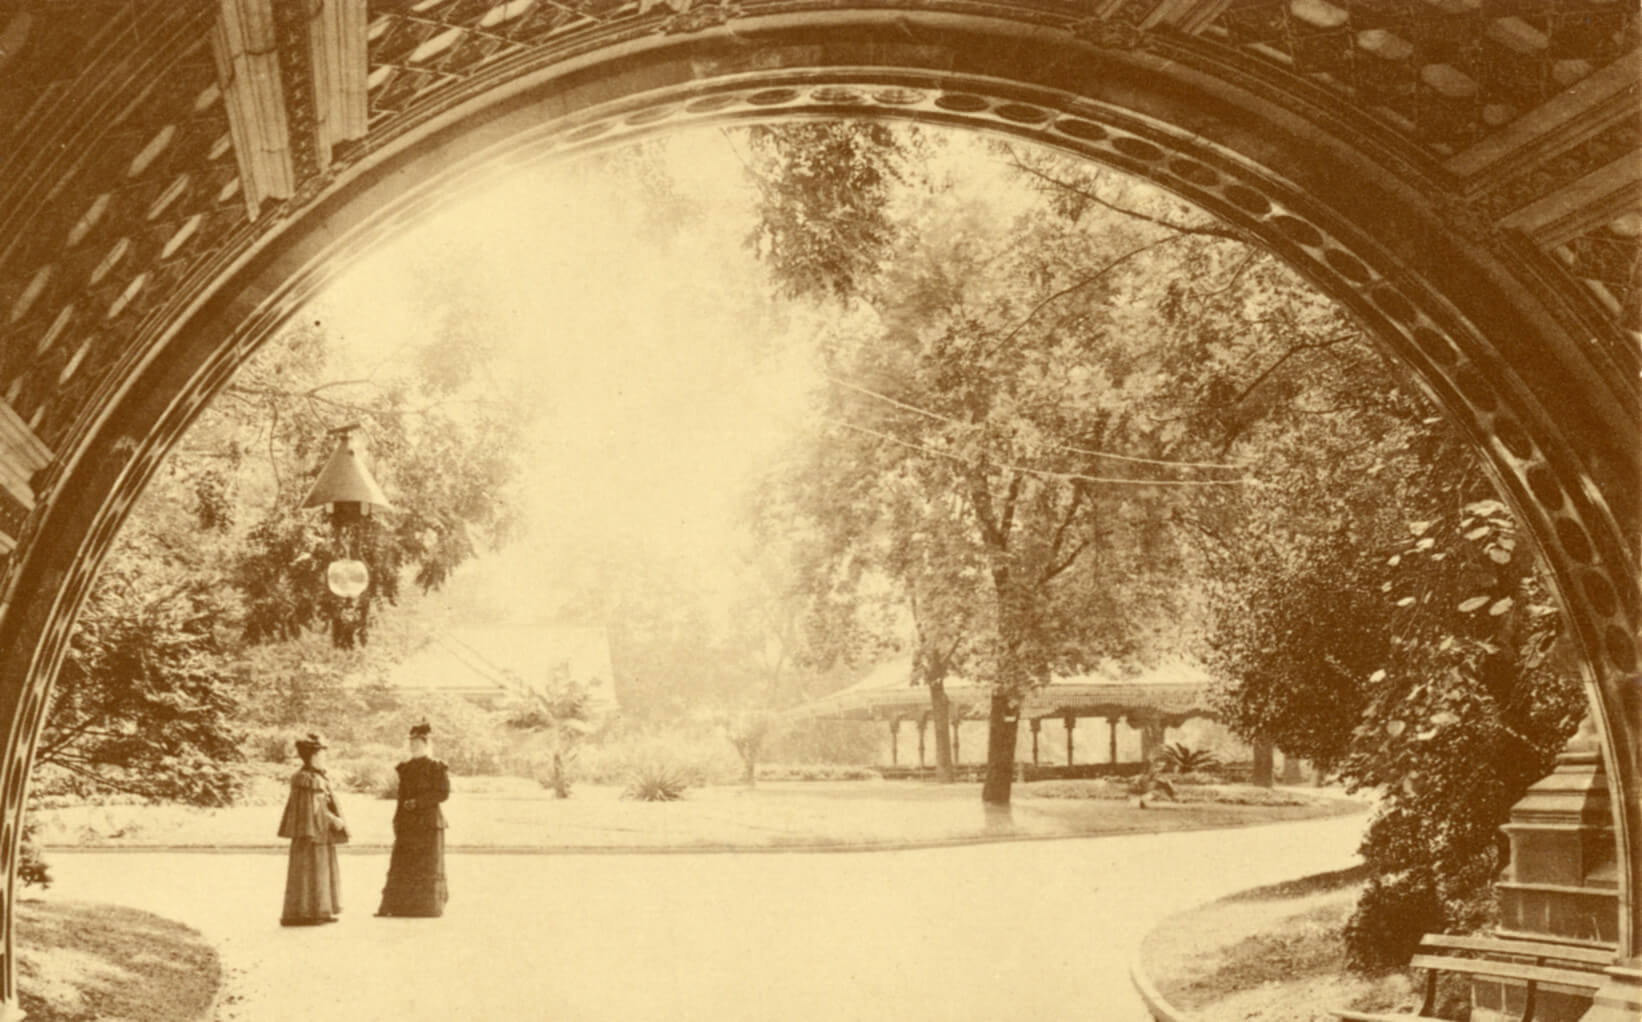 19th century view from under the bridge. Photo via Prospect Park Archives/Bob Levine Collections